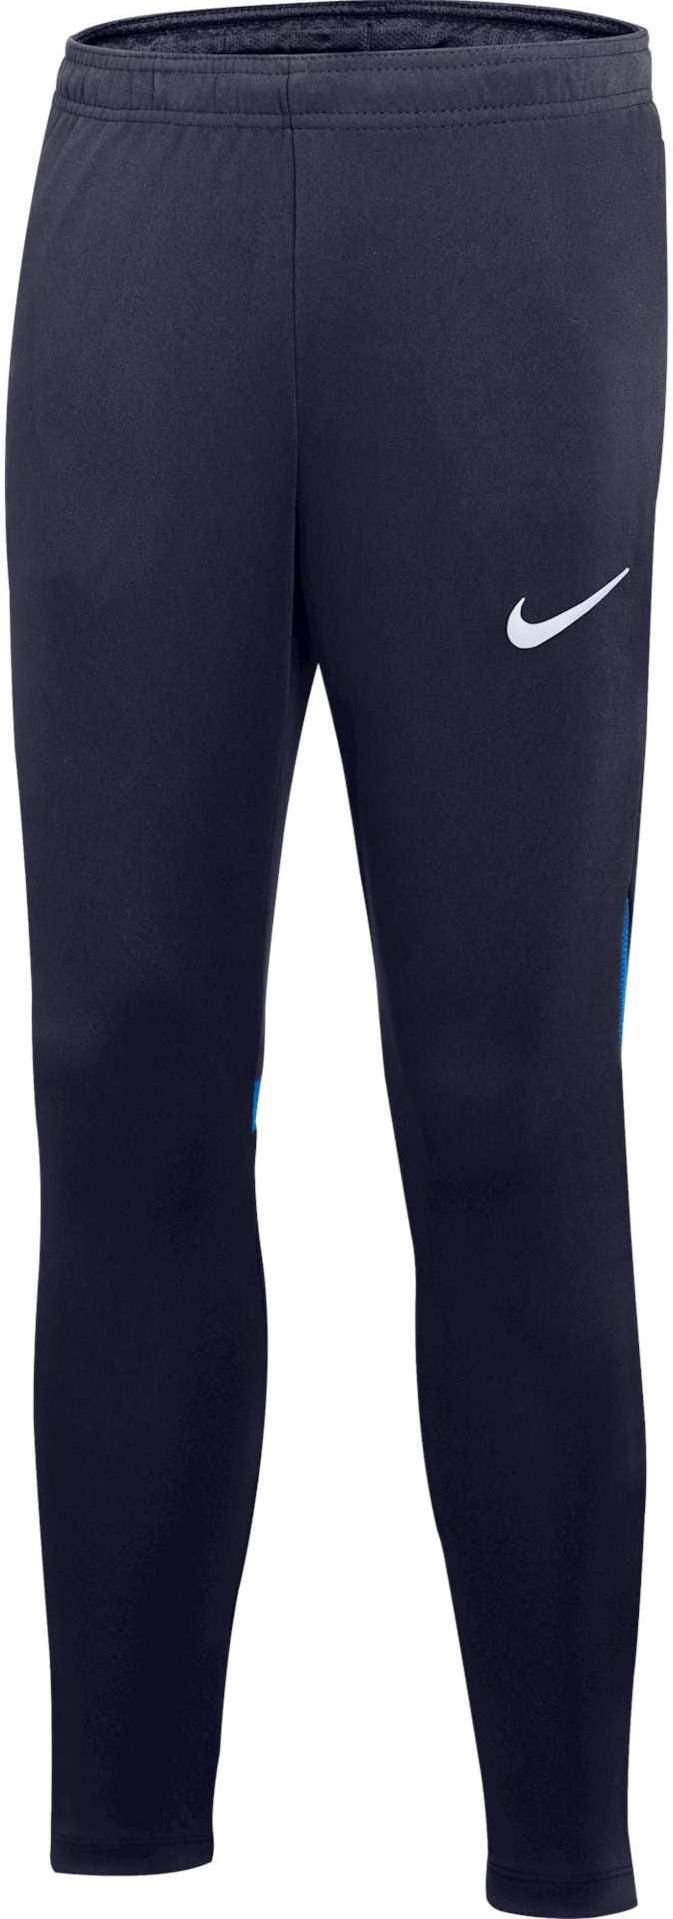 nike academy pro pant youth 413385 dh9325 451